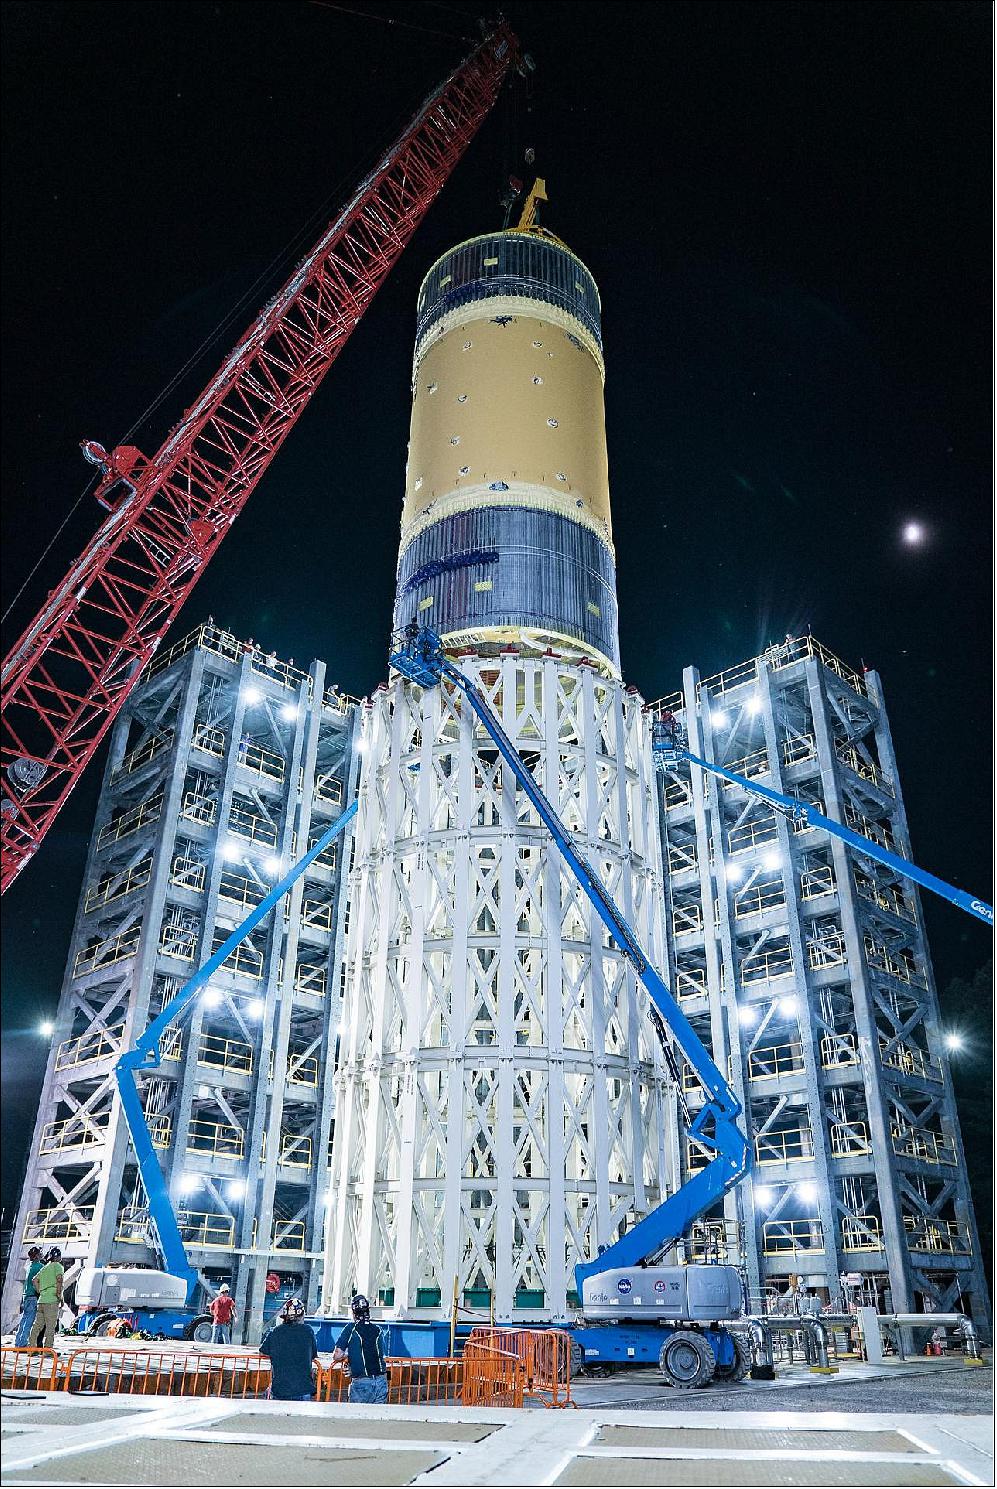 Figure 22: The liquid oxygen tank structural test article, shown here, for NASA’s Space Launch System (SLS) rocket’s core stage was the last test article loaded into the test stand July 10, 2019. The liquid oxygen tank is one of two propellant tanks in the rocket’s massive core stage that will produce more than 2 million pounds of thrust to help launch Artemis-1, the first flight of SLS and NASA’s Orion spacecraft to the Moon. Now, the tank will undergo the final test completing a three-year structural test campaign at NASA’s Marshall Space Flight Center in Huntsville, Alabama. Tests conducted during this campaign put the rocket’s structures from the top of the upper stage to the bottom of the core stage through strenuous tests simulating the forces that the rocket will experience during launch and flight. All four of the core stage structural test articles were manufactured at NASA’s Michoud Assembly Facility in New Orleans and delivered by NASA’s barge Pegasus to Marshall (image credit: NASA/Tyler Martin)